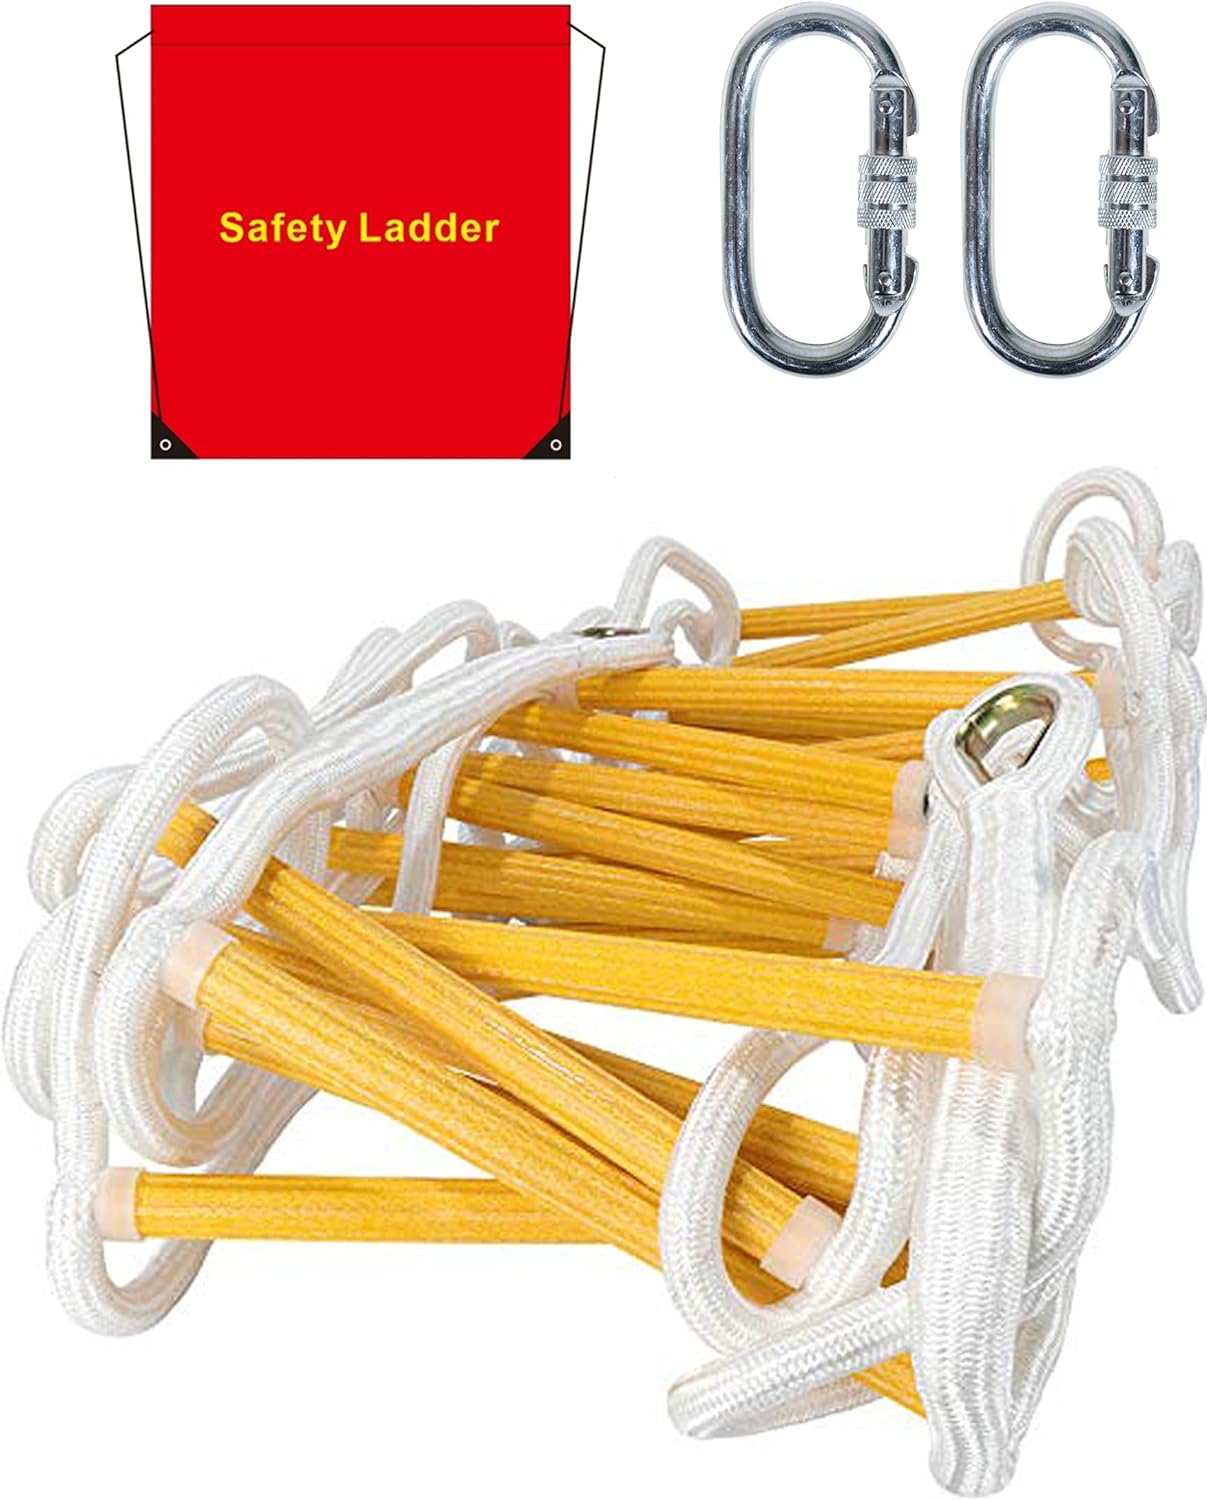 BHWHOME Emergency Fire Escape Ladder Flame Resistant Safety Rope Ladder  with Hooks Fast to Deploy